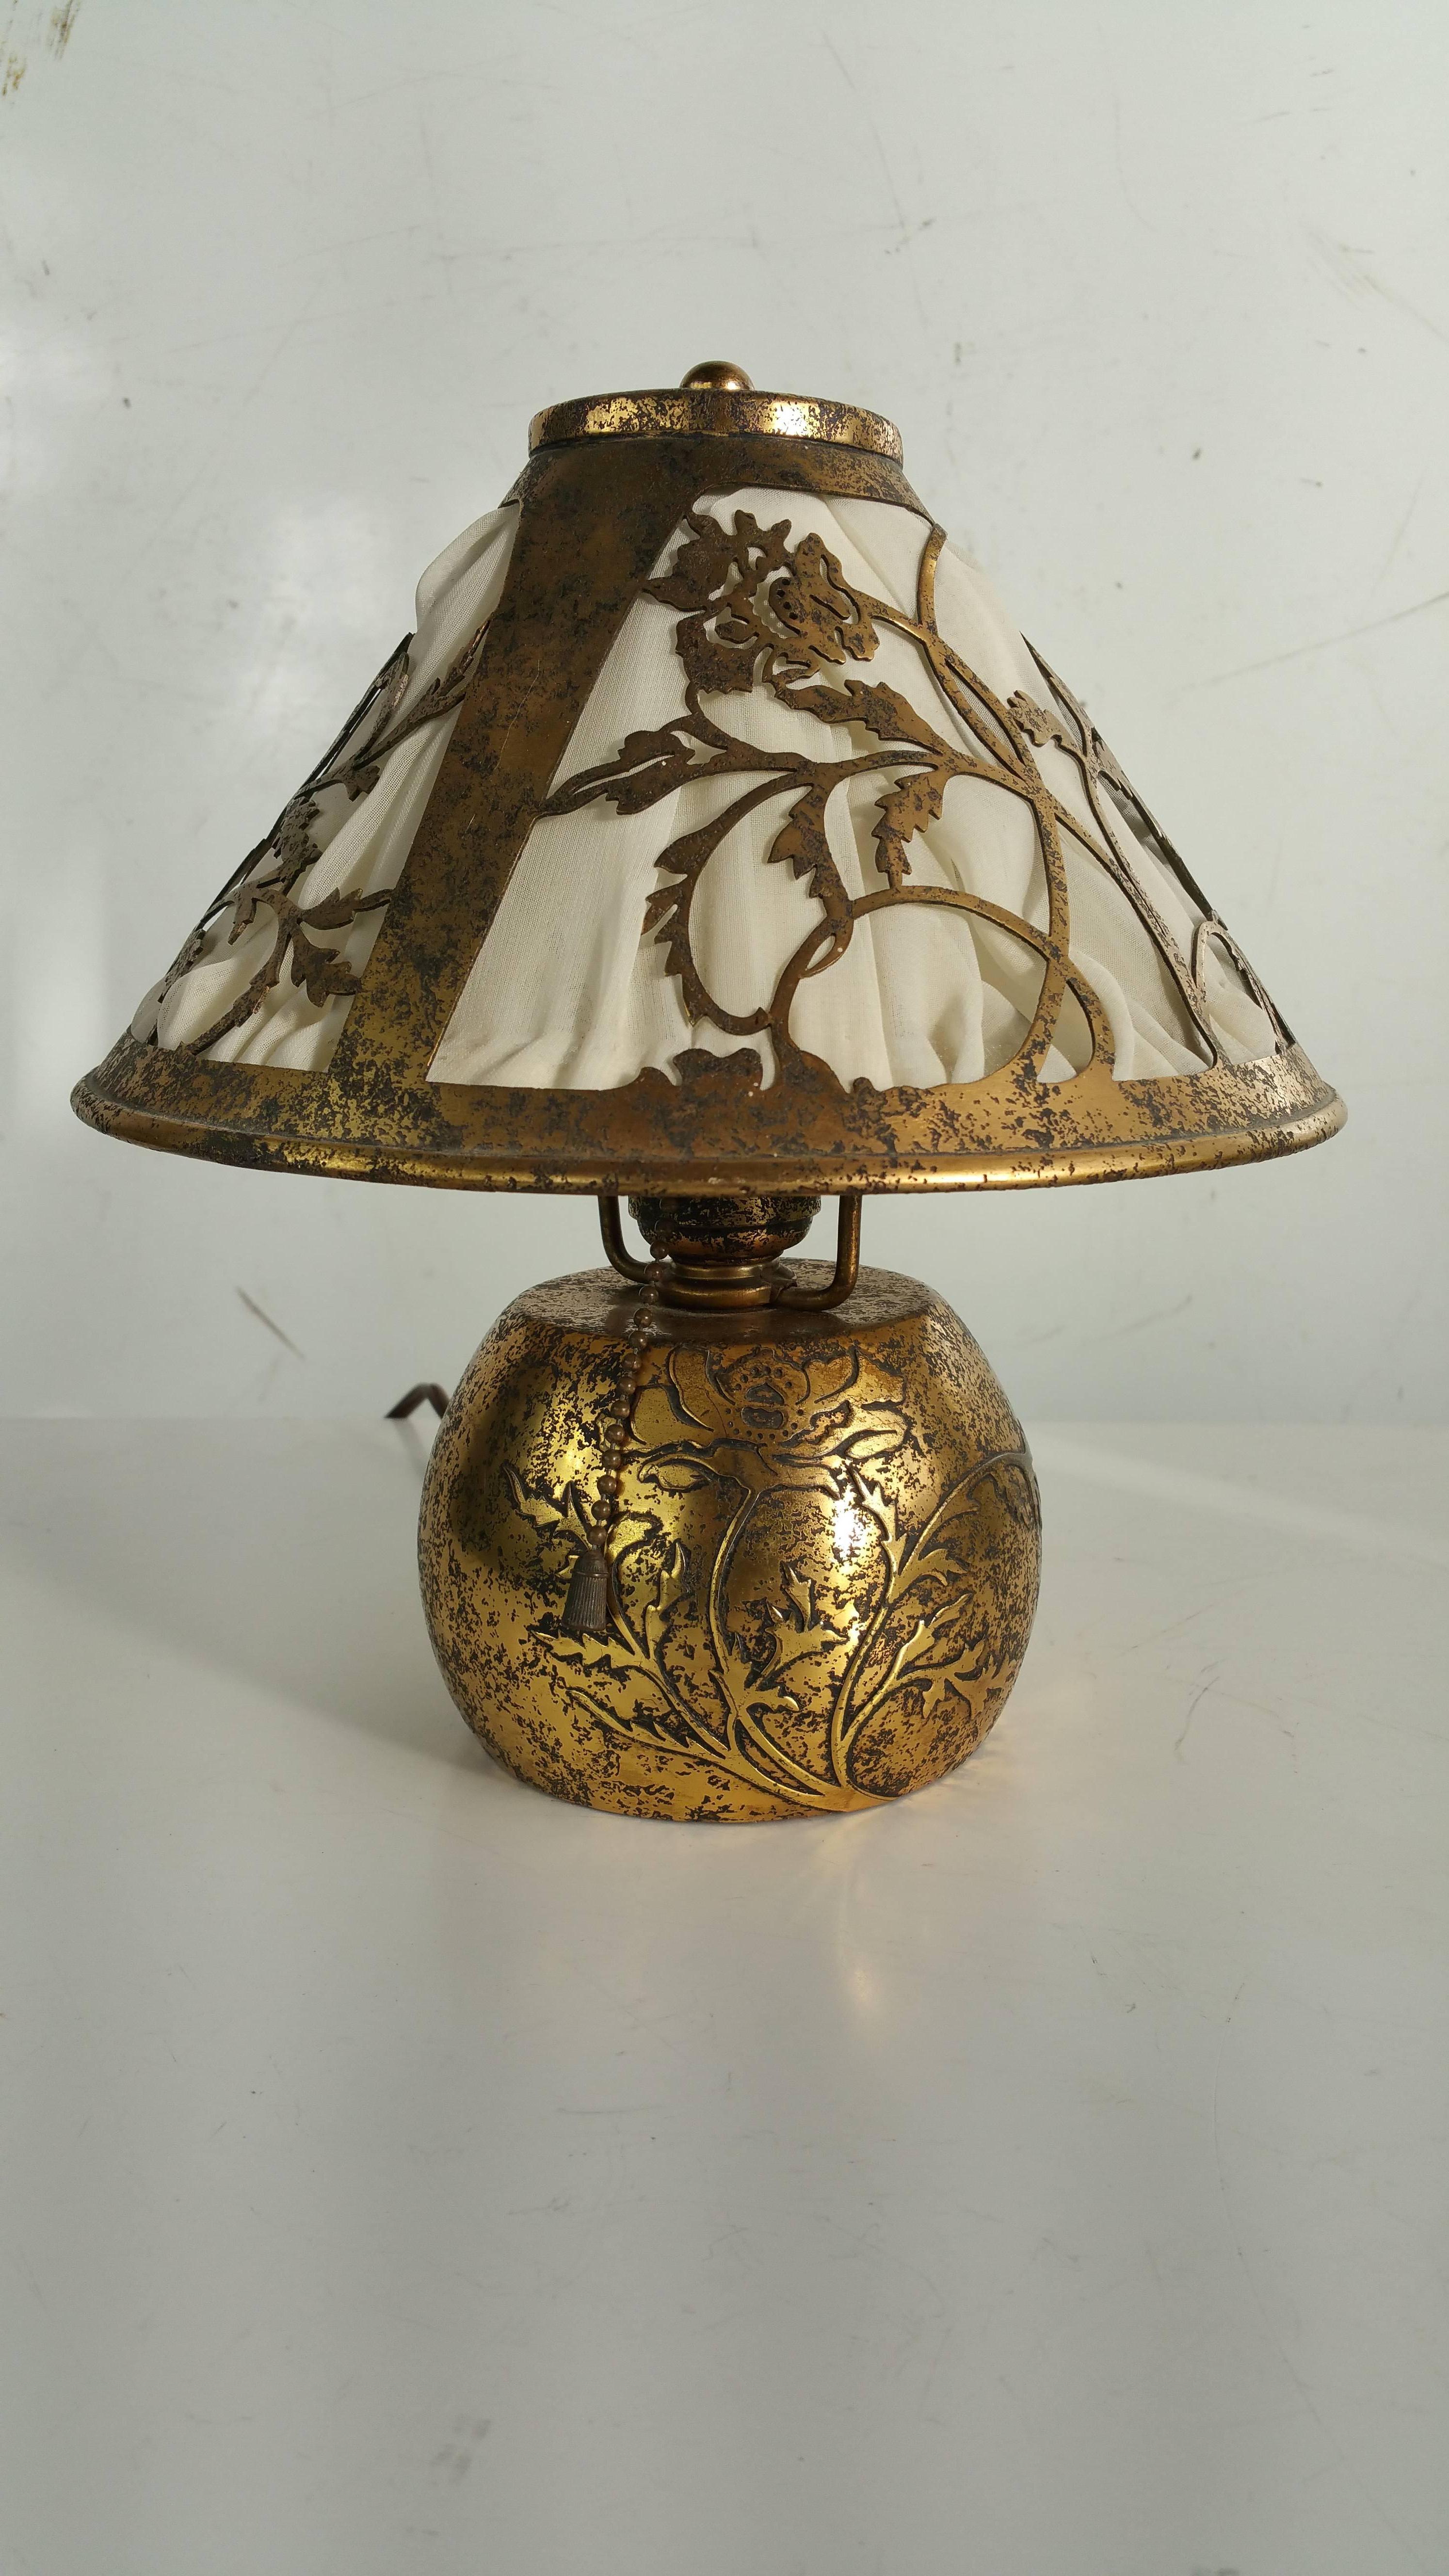 American Classic Arts and Crafts Boudoir Lamp, Silver over Bronze, by Heintz Metal Arts